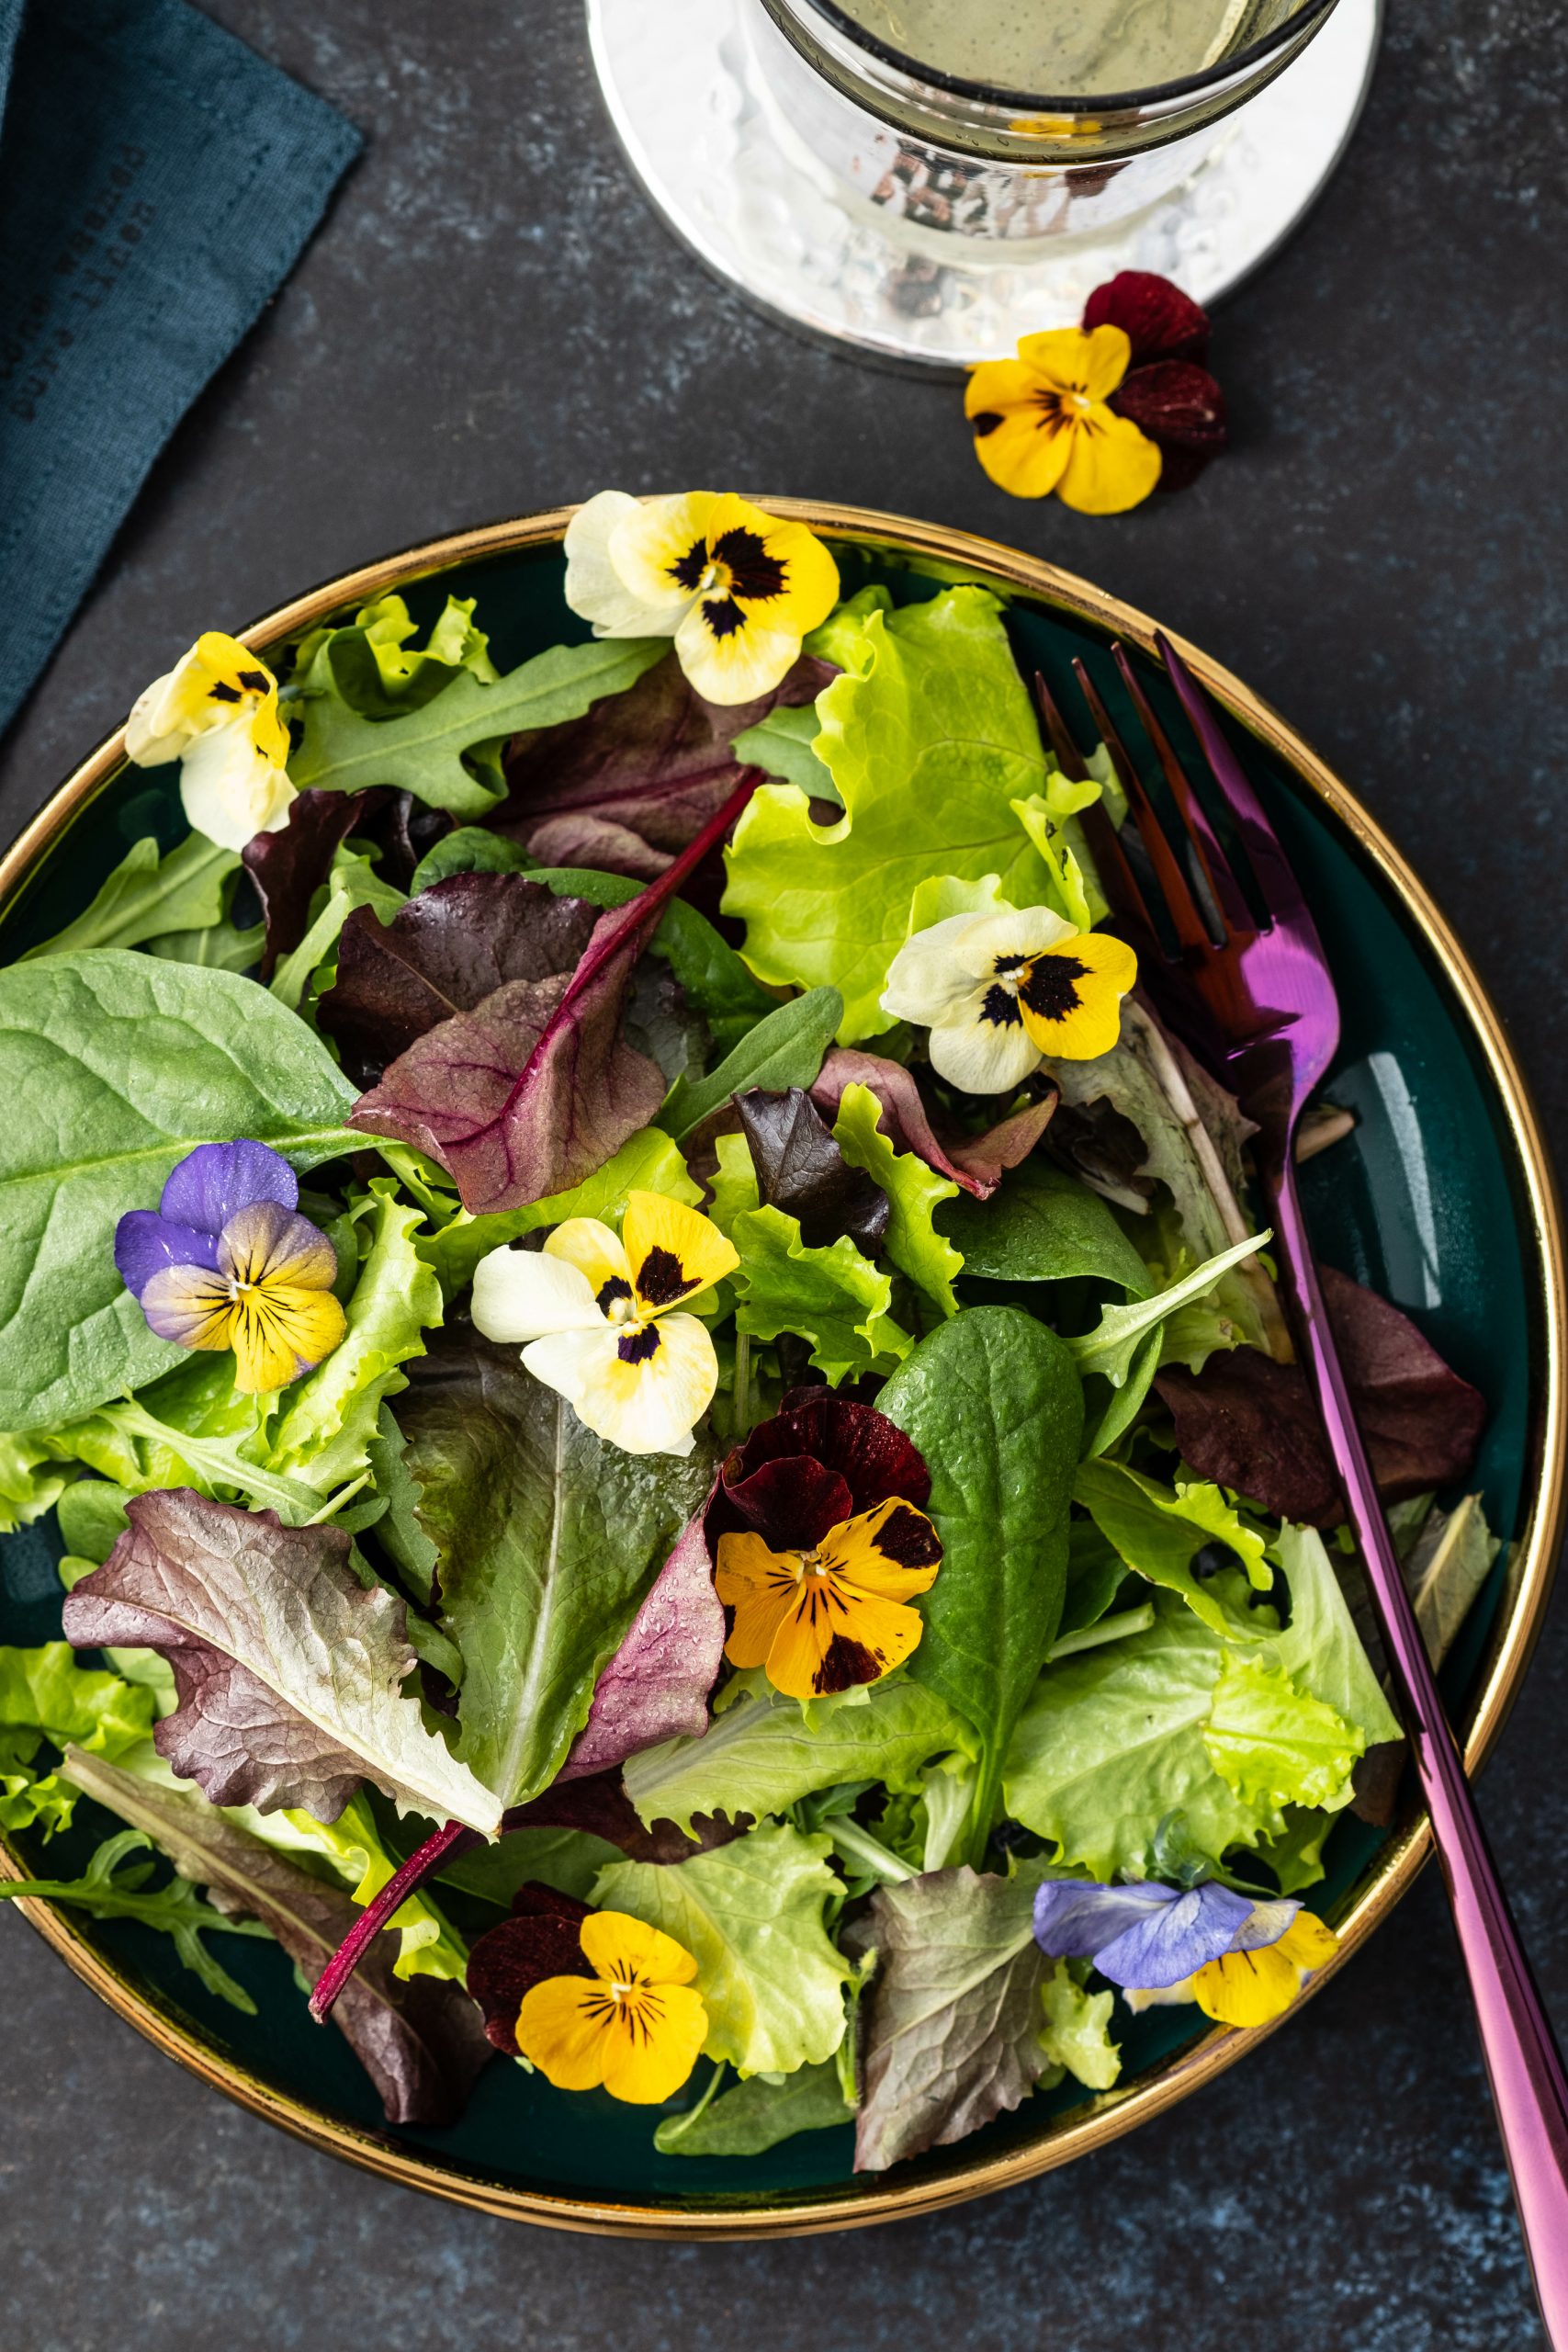 Violet flowers are delicious in a salad